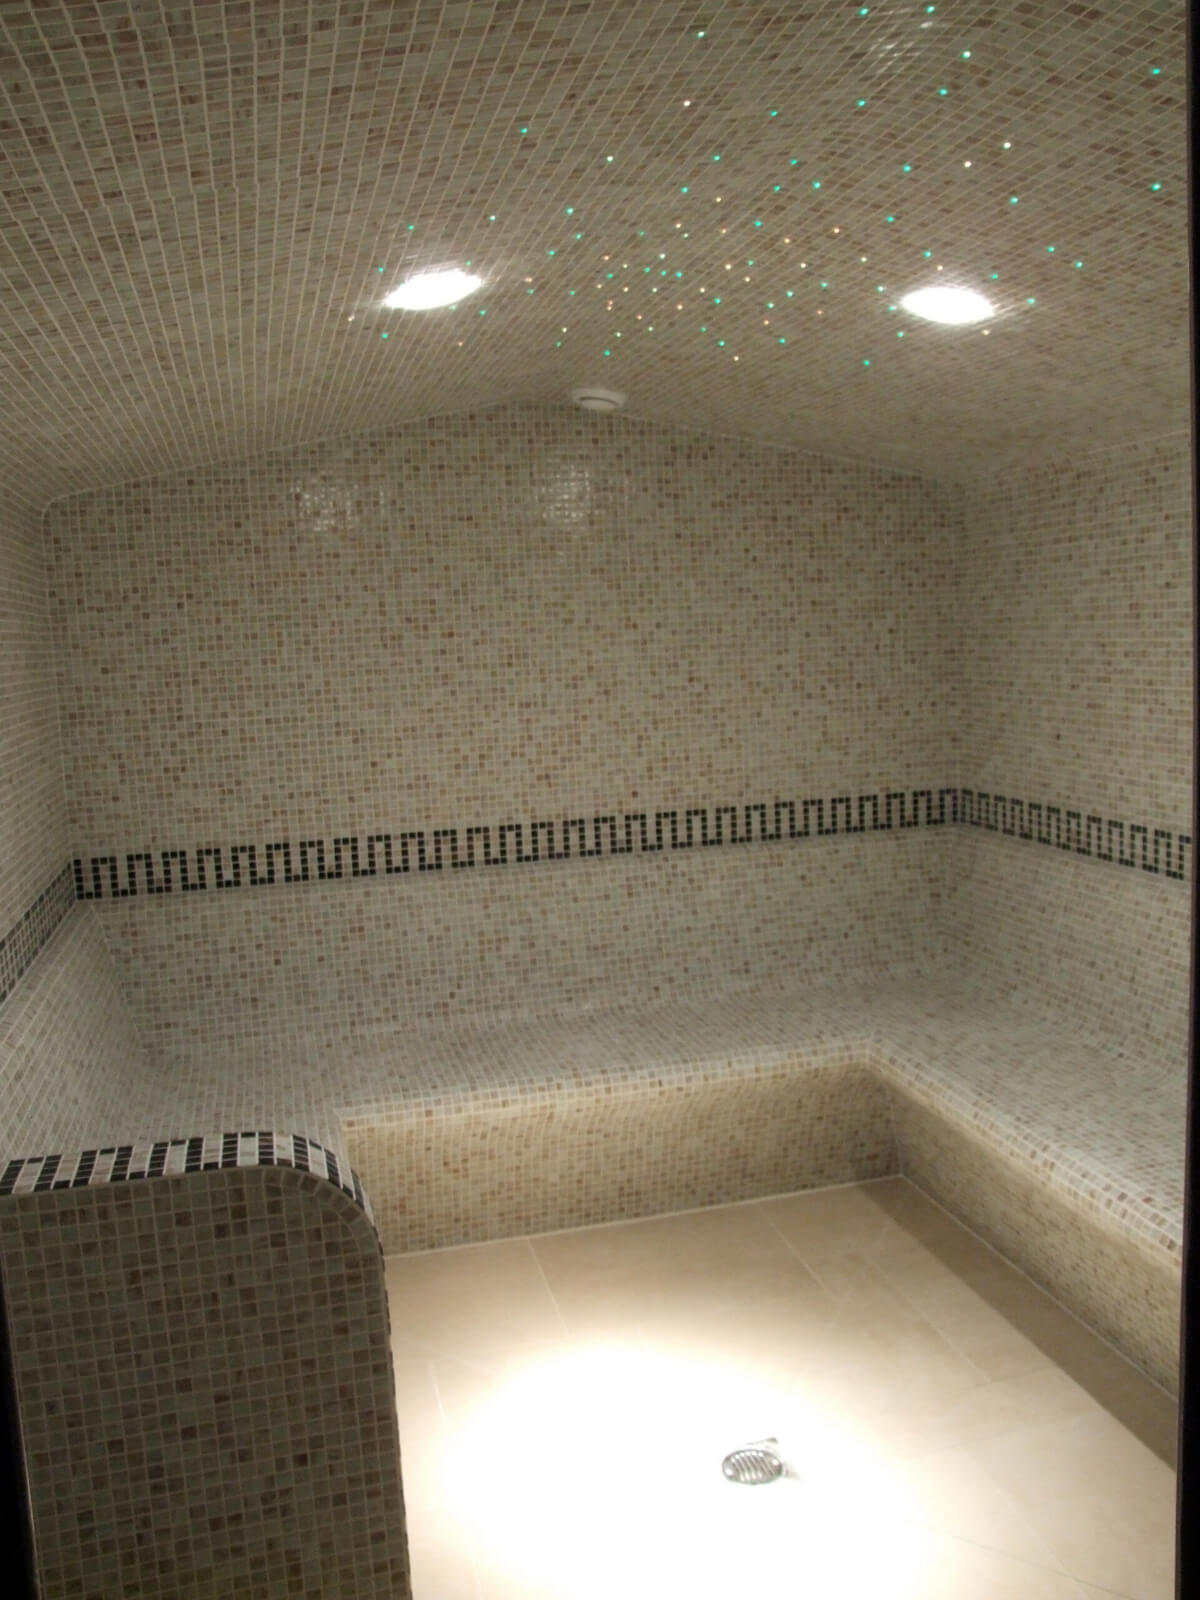 Benches With Tiles in a Steam Room